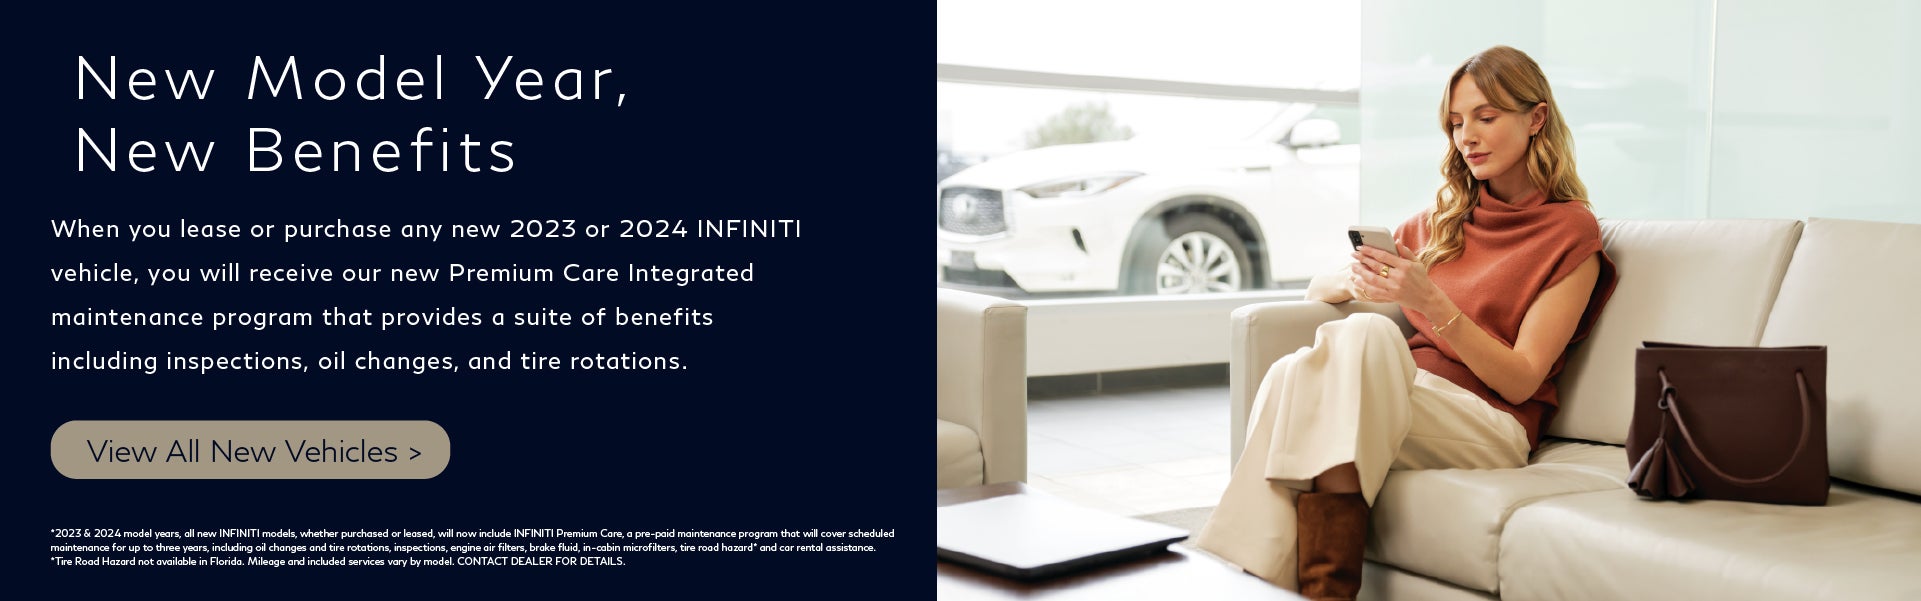 INFINITI Premium Care available for all new vehicles.